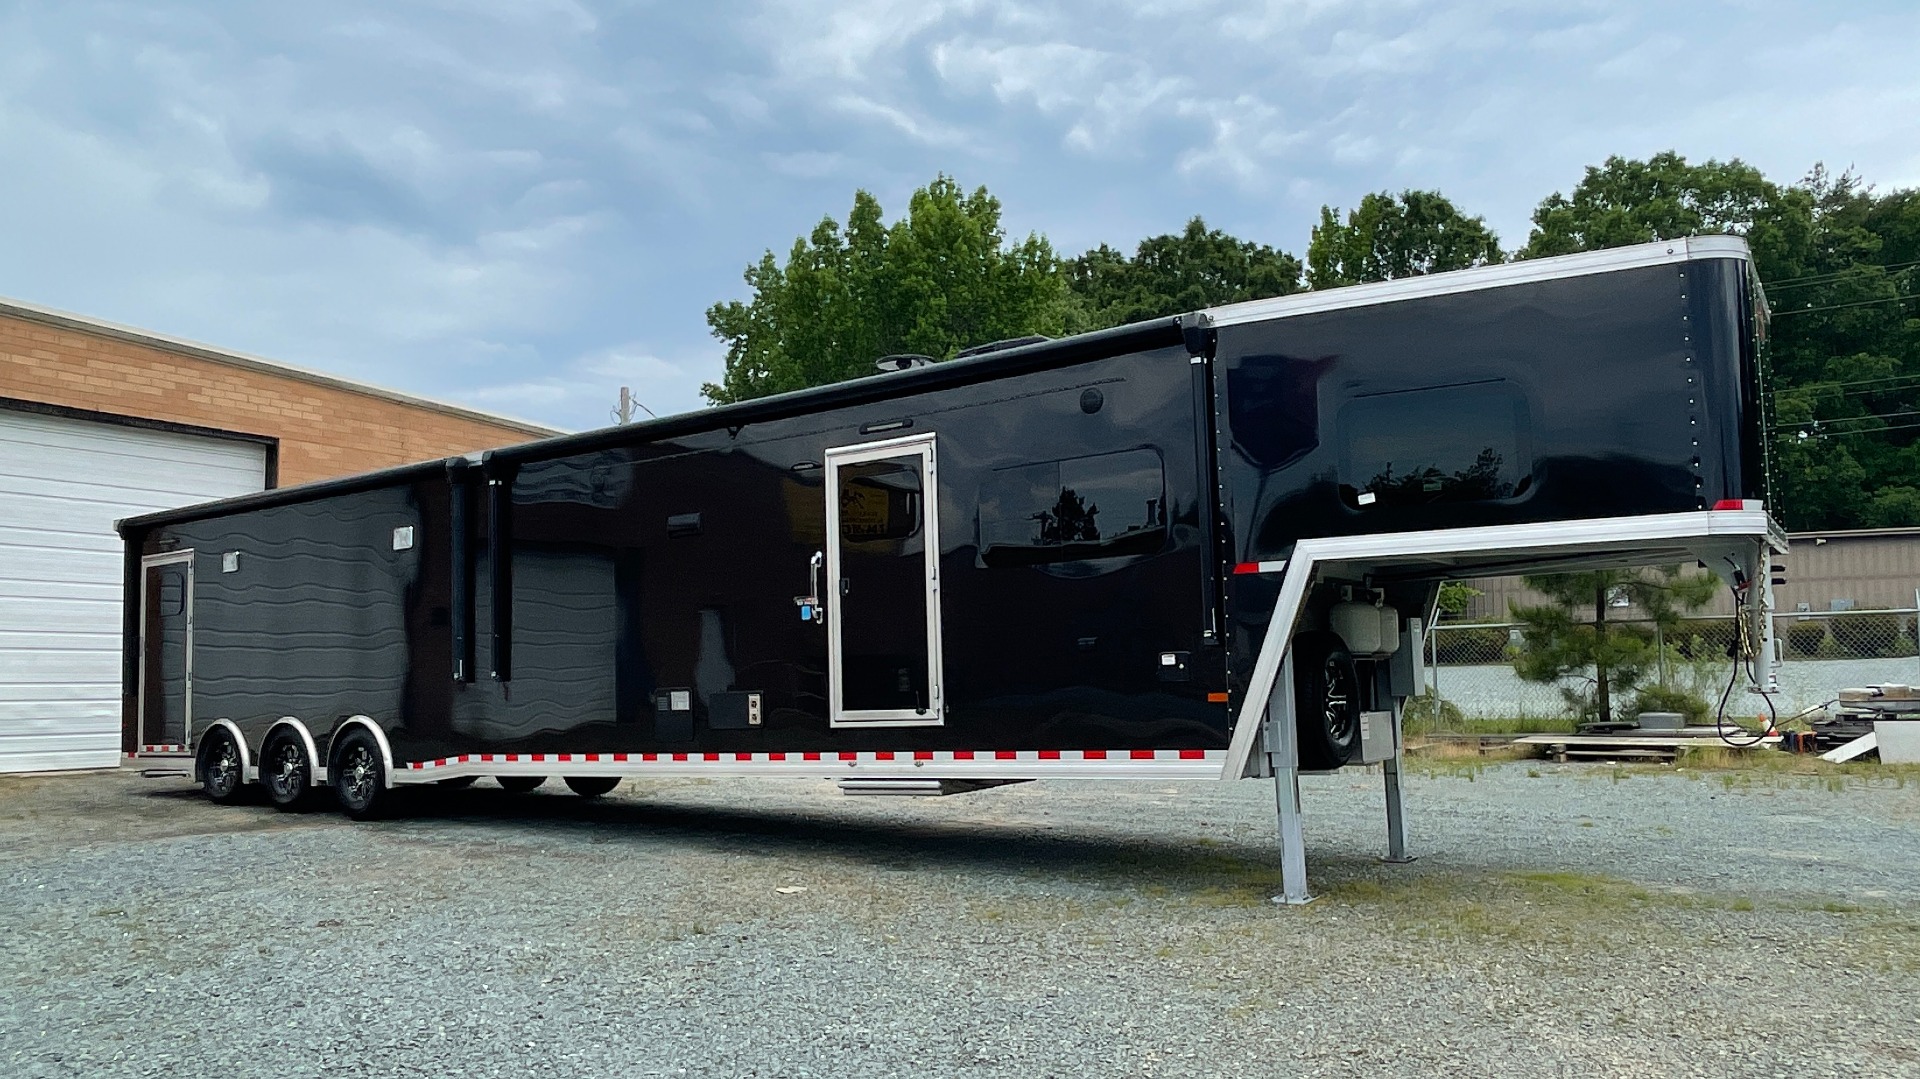 Used 2020 Sundowner 2986 SGM TOY HAULER 49FT / 29FT LIVING / 20FT FOR TOYS / TRIPLE-AXLE for sale $115,000 at Formula Imports in Charlotte NC 28227 1